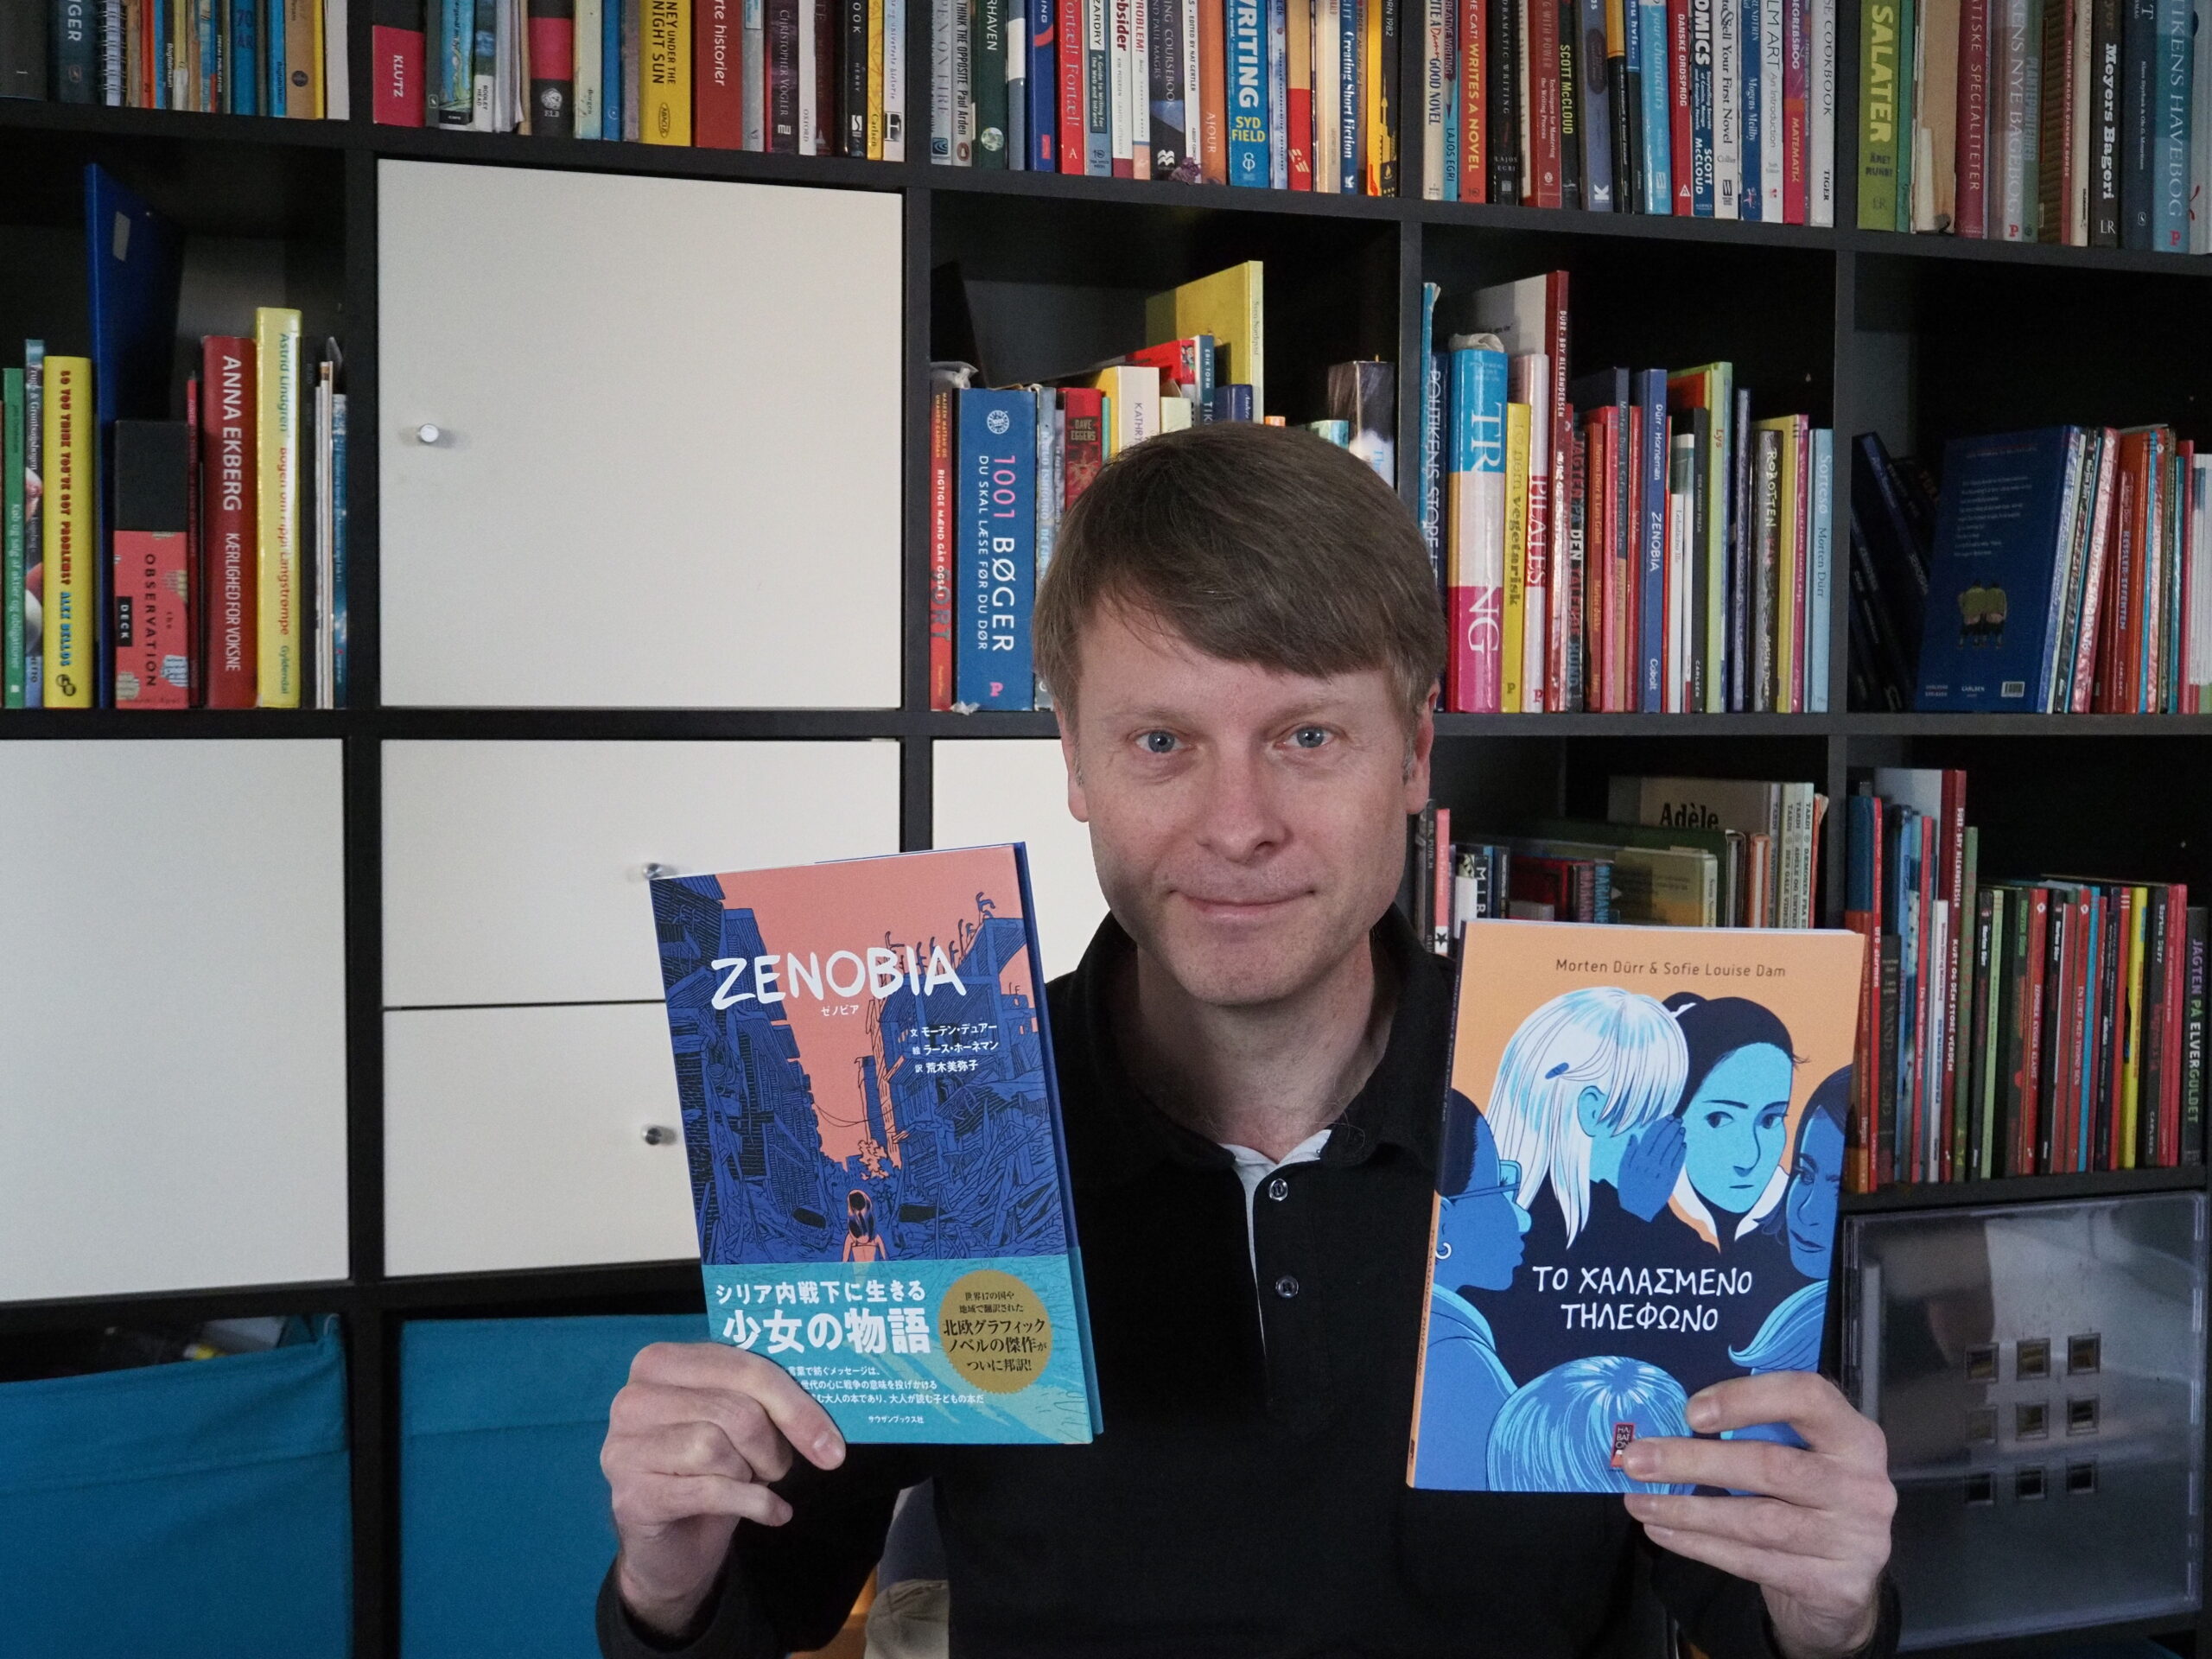 Morten Dürr with the Japanese edition of “Zenobia” and the Greek edition of “The Whispers Game.”